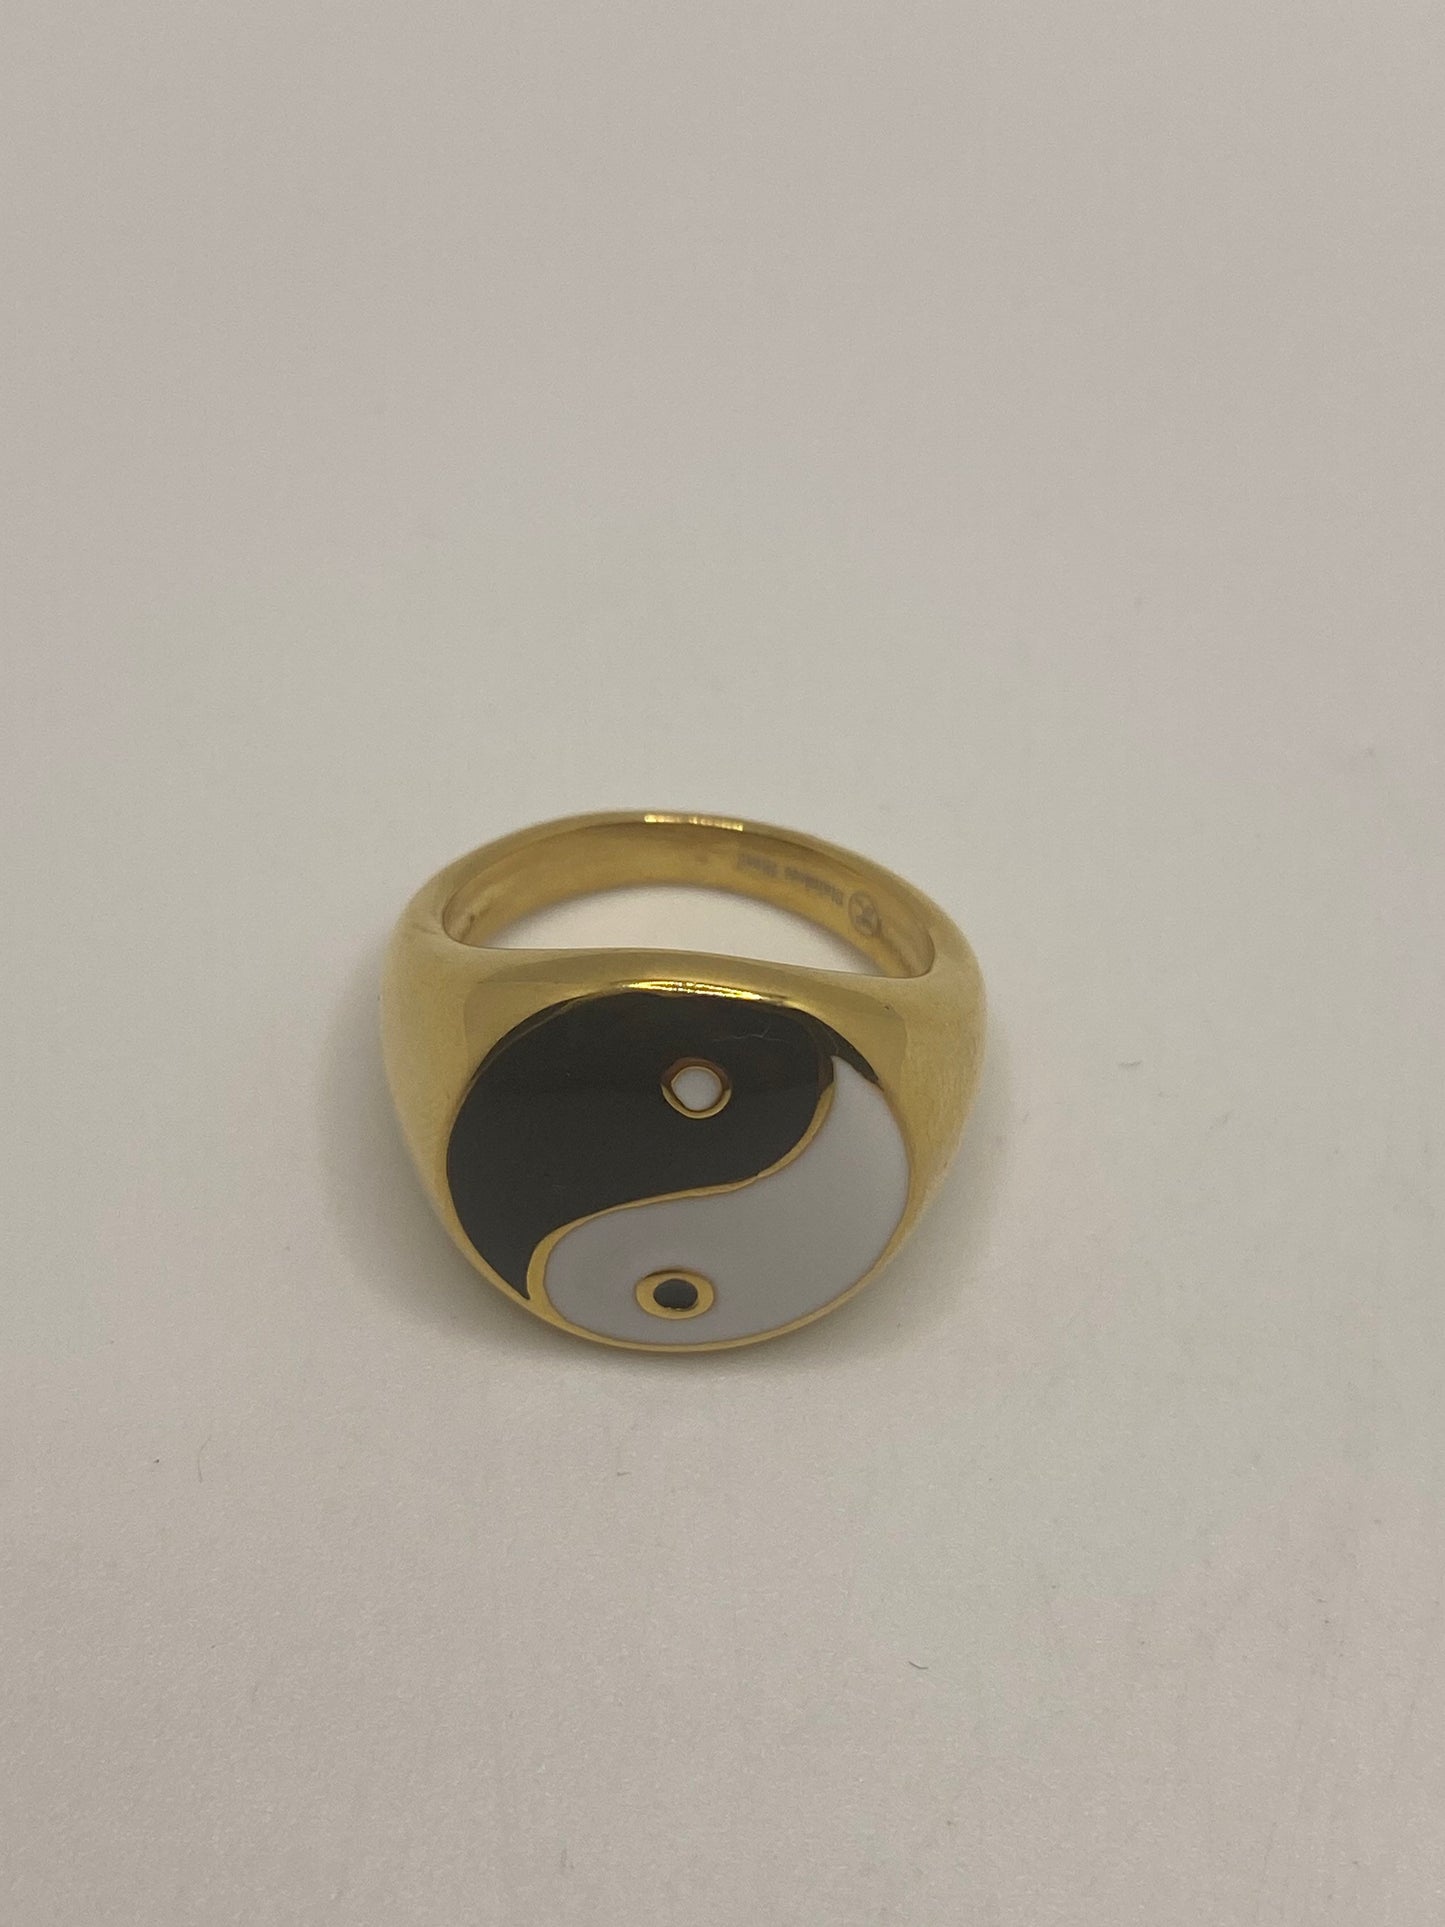 Vintage Gothic Yin Yang Gold Stainless Mens Ring